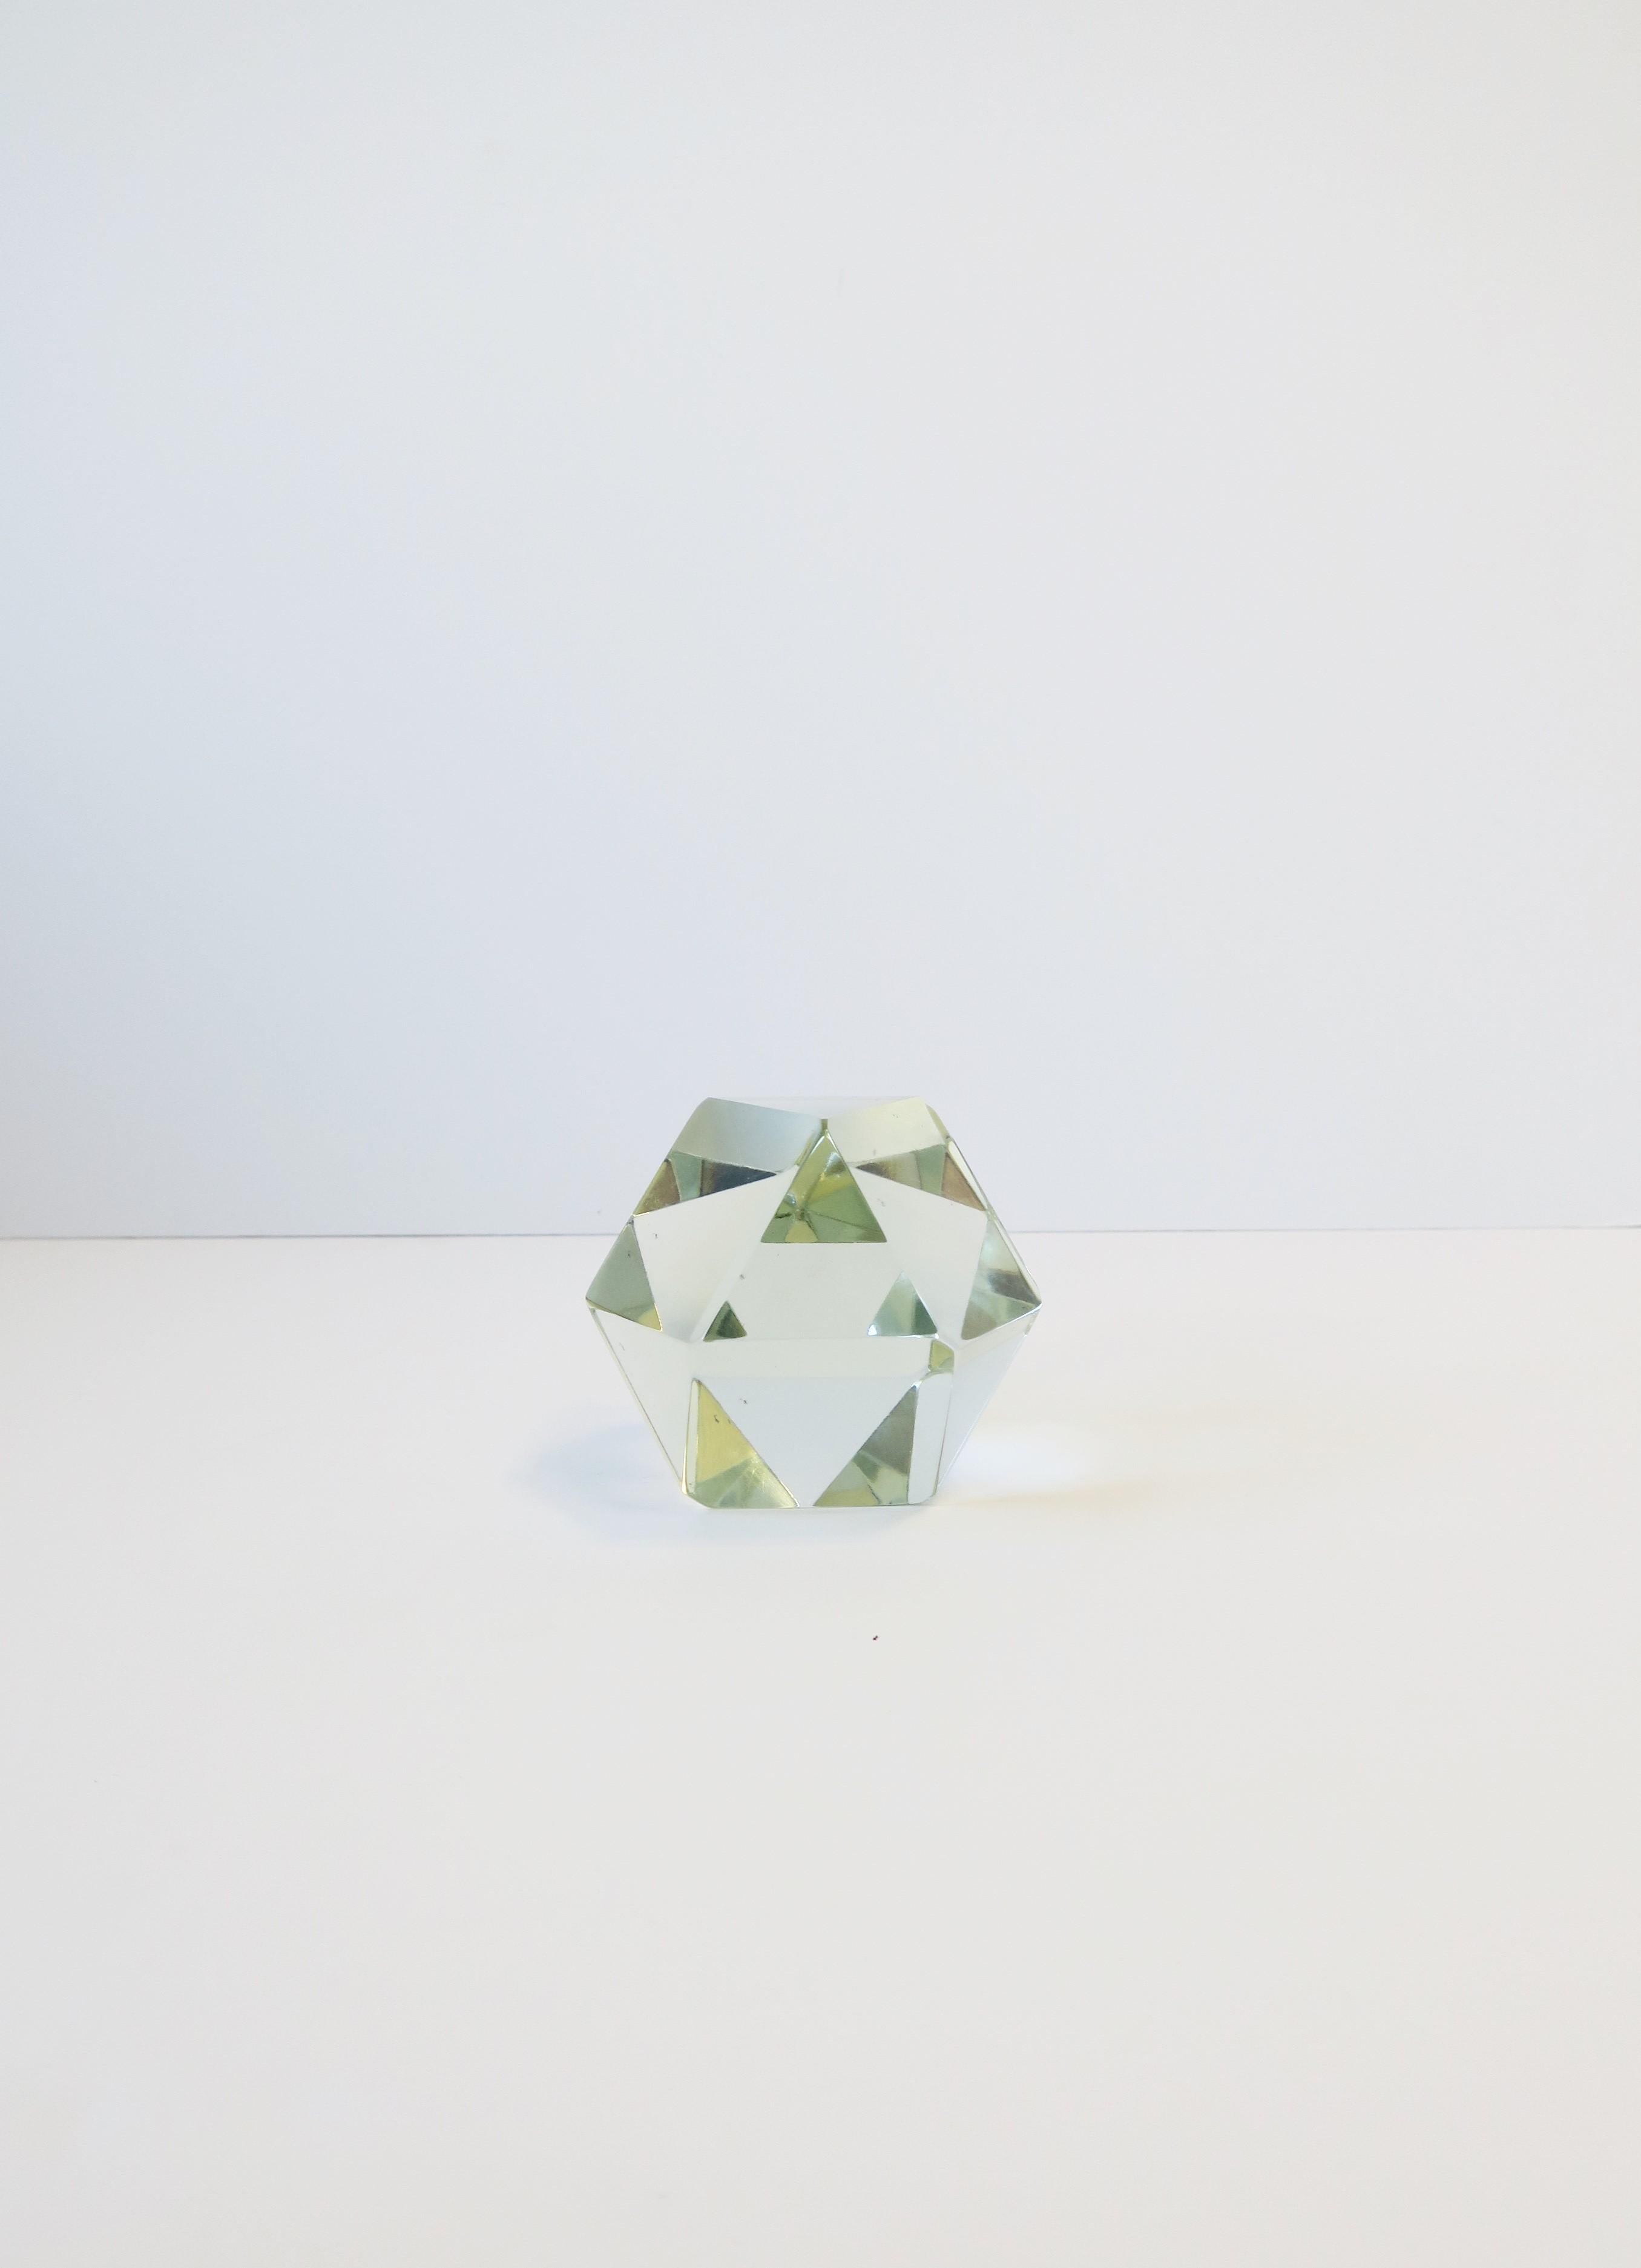 A beautiful crystal geometric paperweight or decorative object, circa late-20th century. A great decorative object (as shown) and a great piece for a desk, office, library, etc. Very good condition as shown. No chips noted. 

Other items shown in